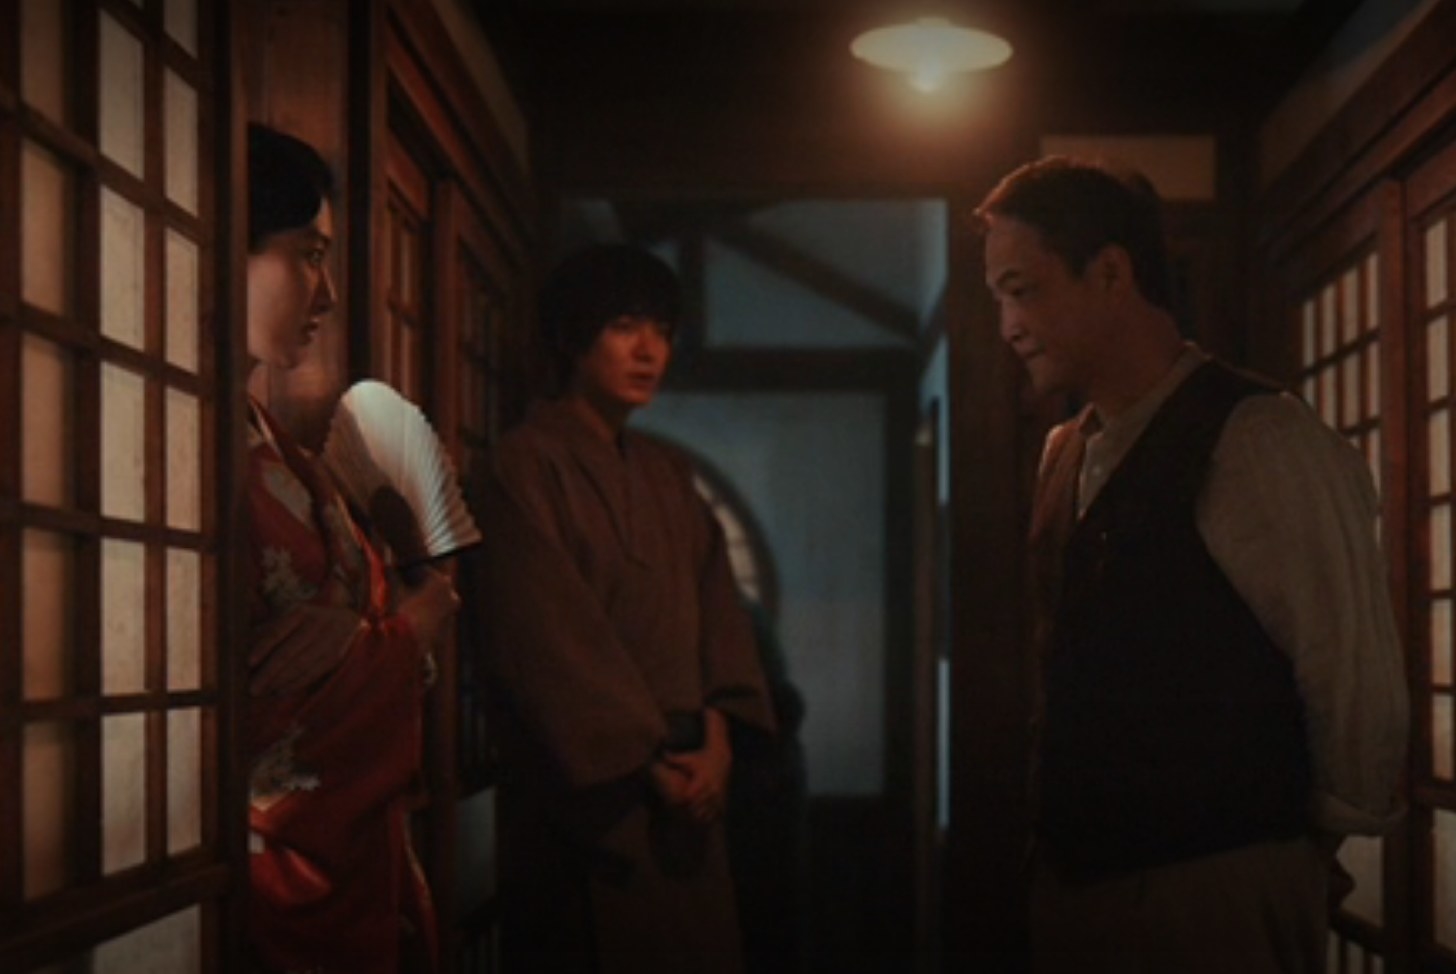 Hansu standing by as his father asks for his money back from a prostitute